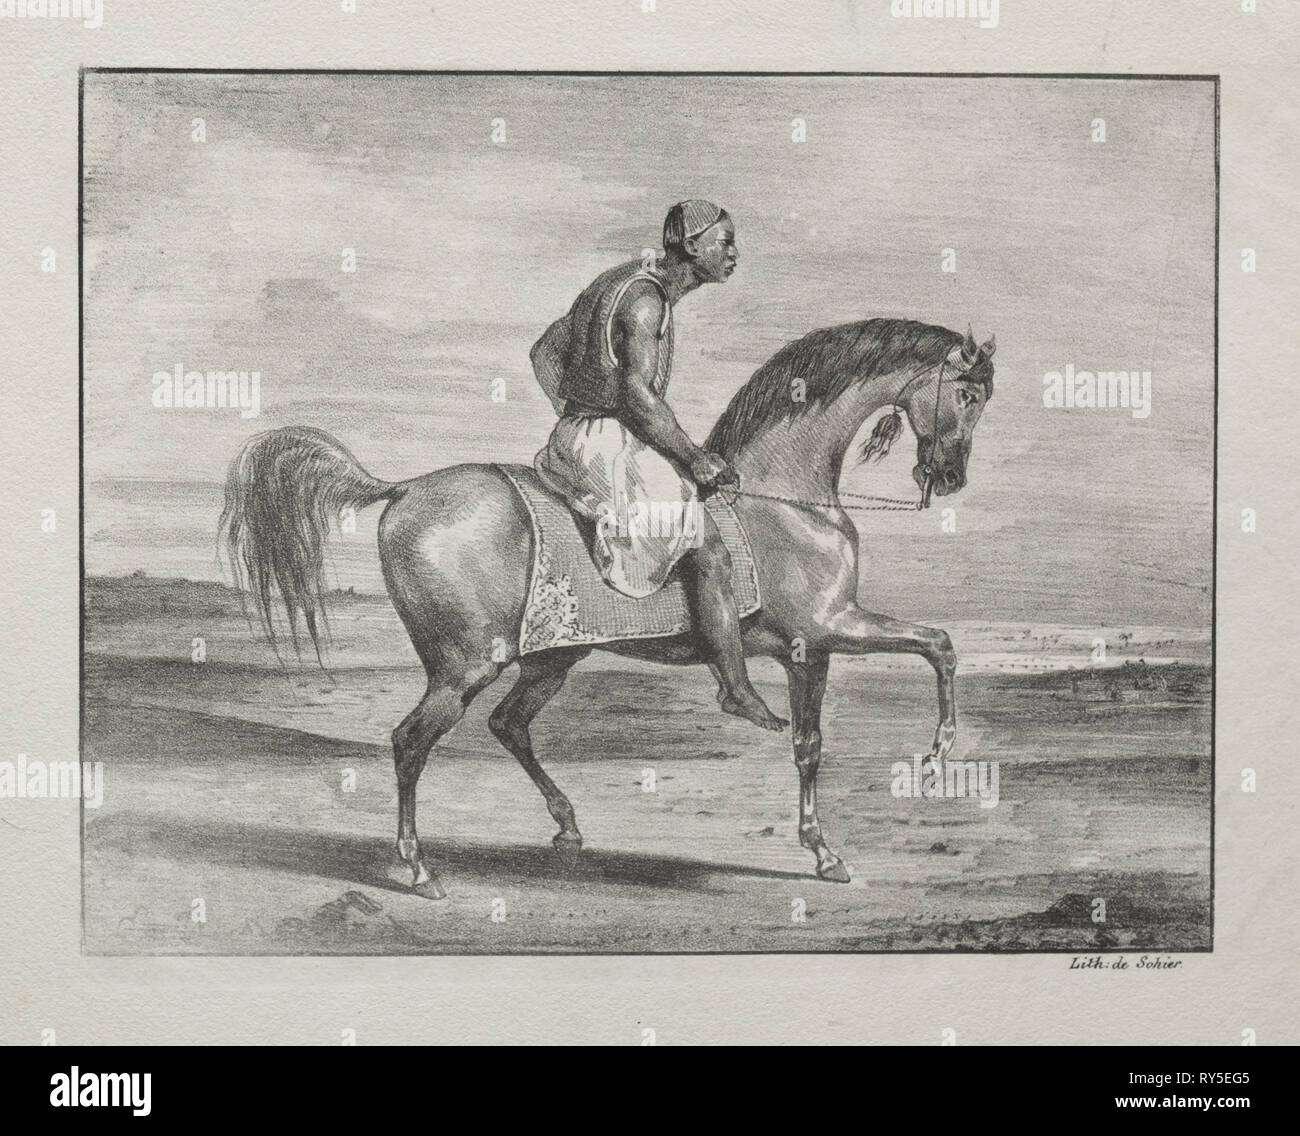 African on Horseback, 1823. Eugène Delacroix (French, 1798-1863). Lithograph; sheet: 25.5 x 29.1 cm (10 1/16 x 11 7/16 in.); image: 16.4 x 21.1 cm (6 7/16 x 8 5/16 in Stock Photo